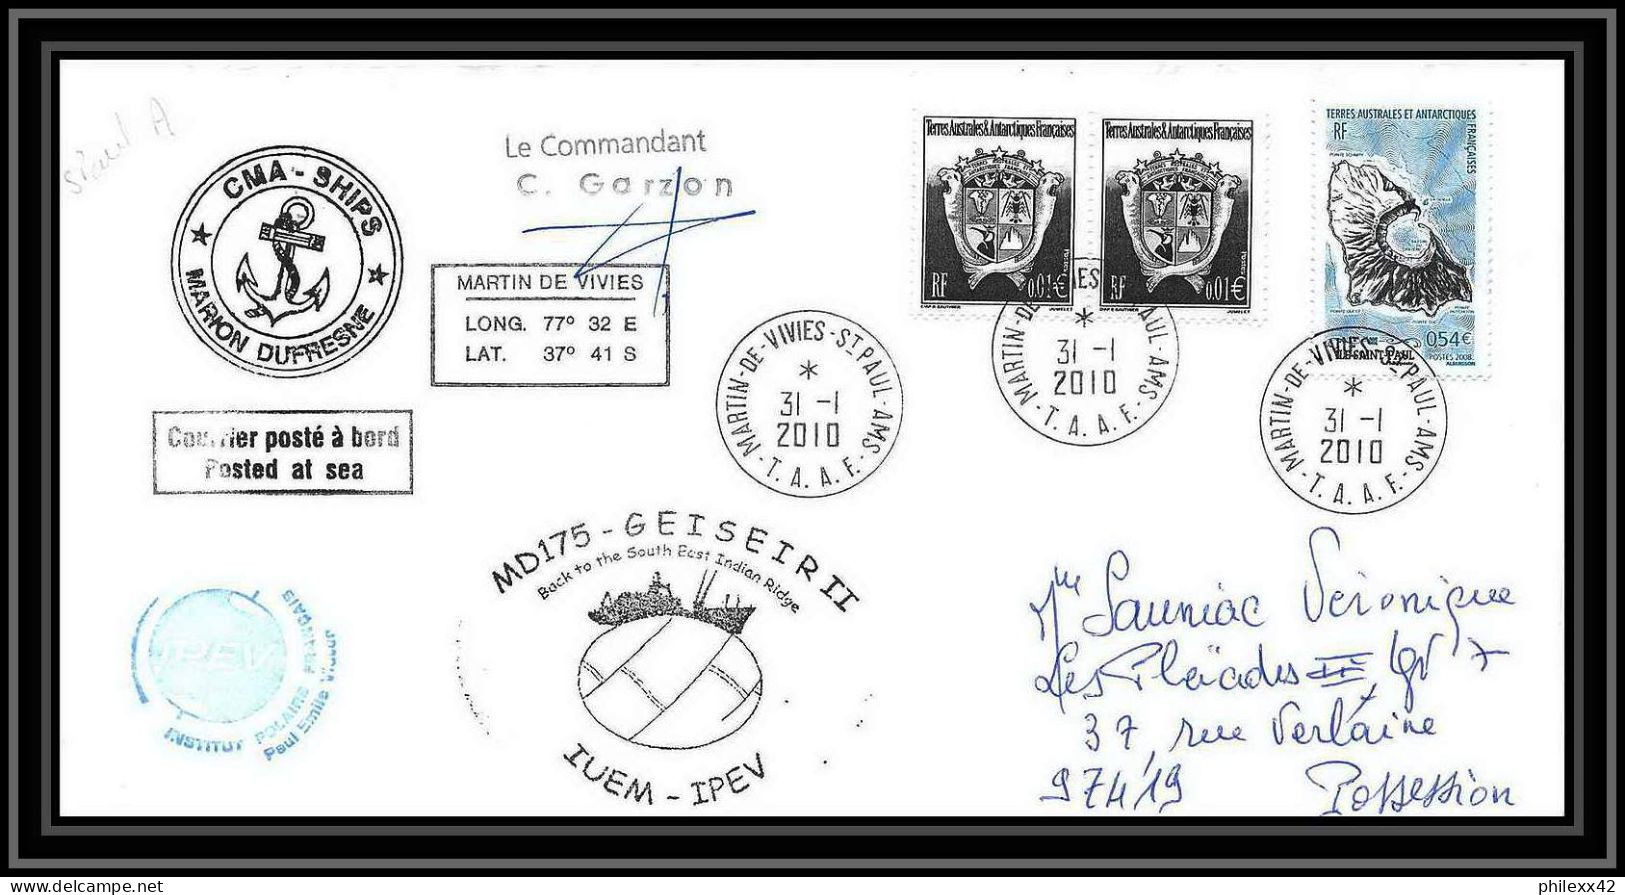 2985 ANTARCTIC Terres Australes TAAF Lettre Cover Dufresne 2 Signé Signed MD 175 31/1/2010 N°506 - Spedizioni Antartiche